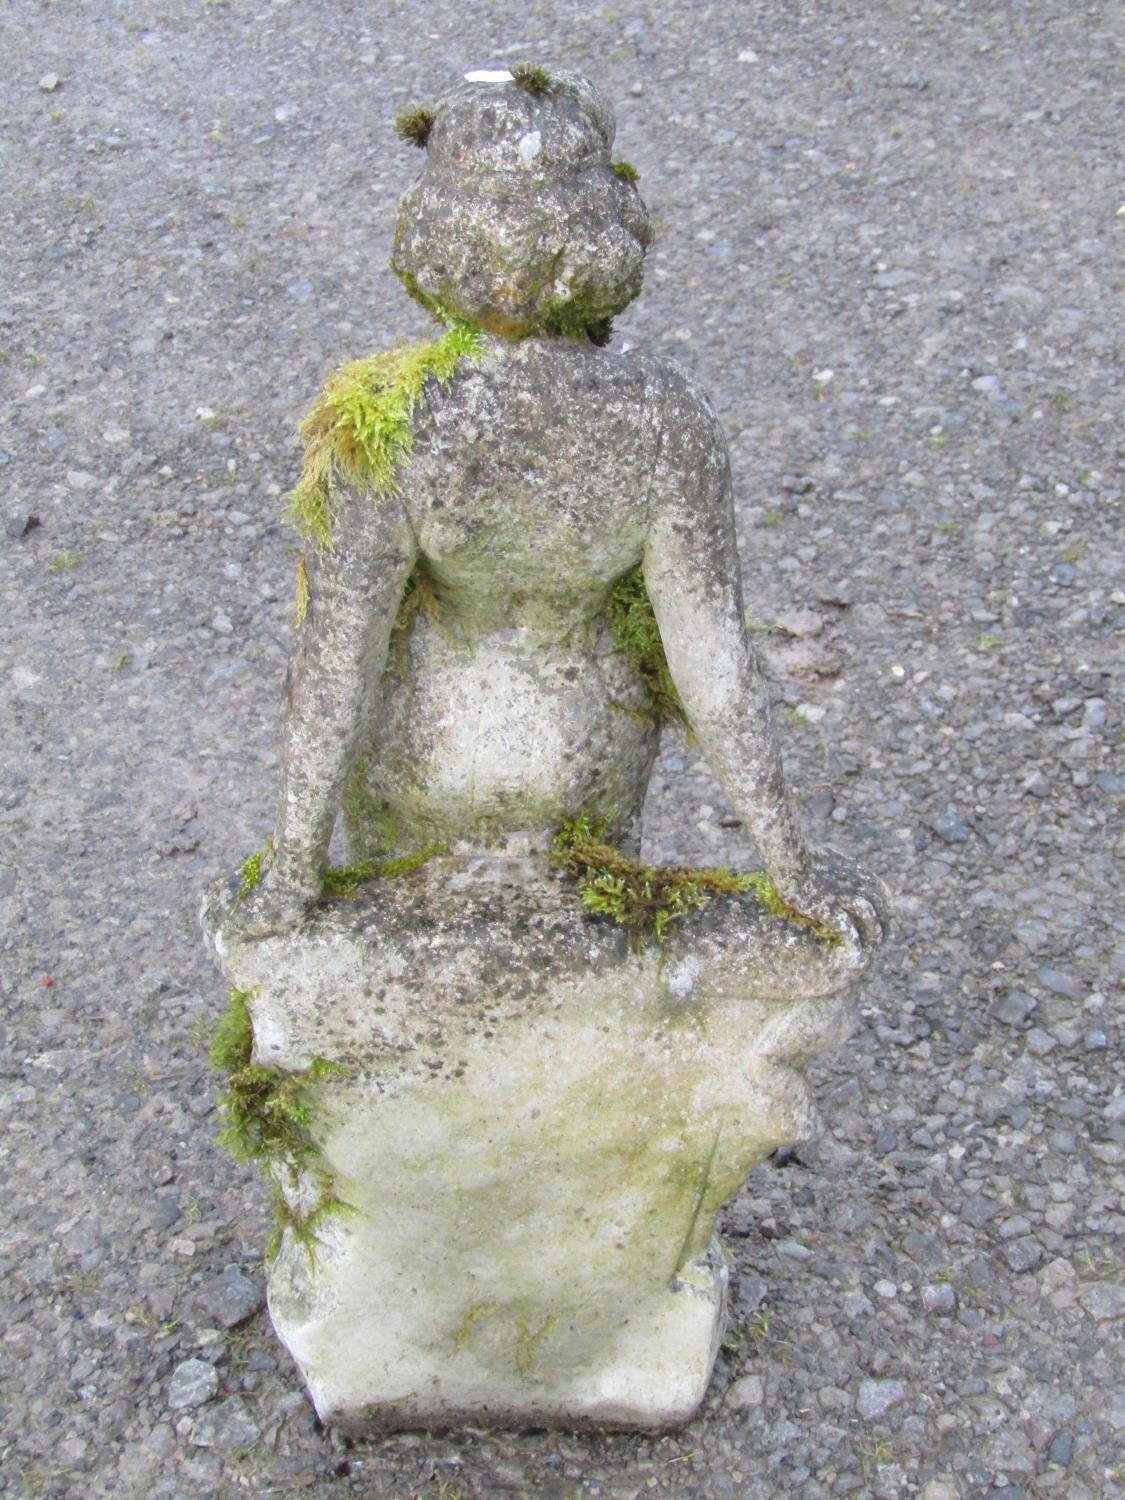 "Cleopatra" weathered cast composition stone garden ornament, 75 cm high - Image 3 of 5